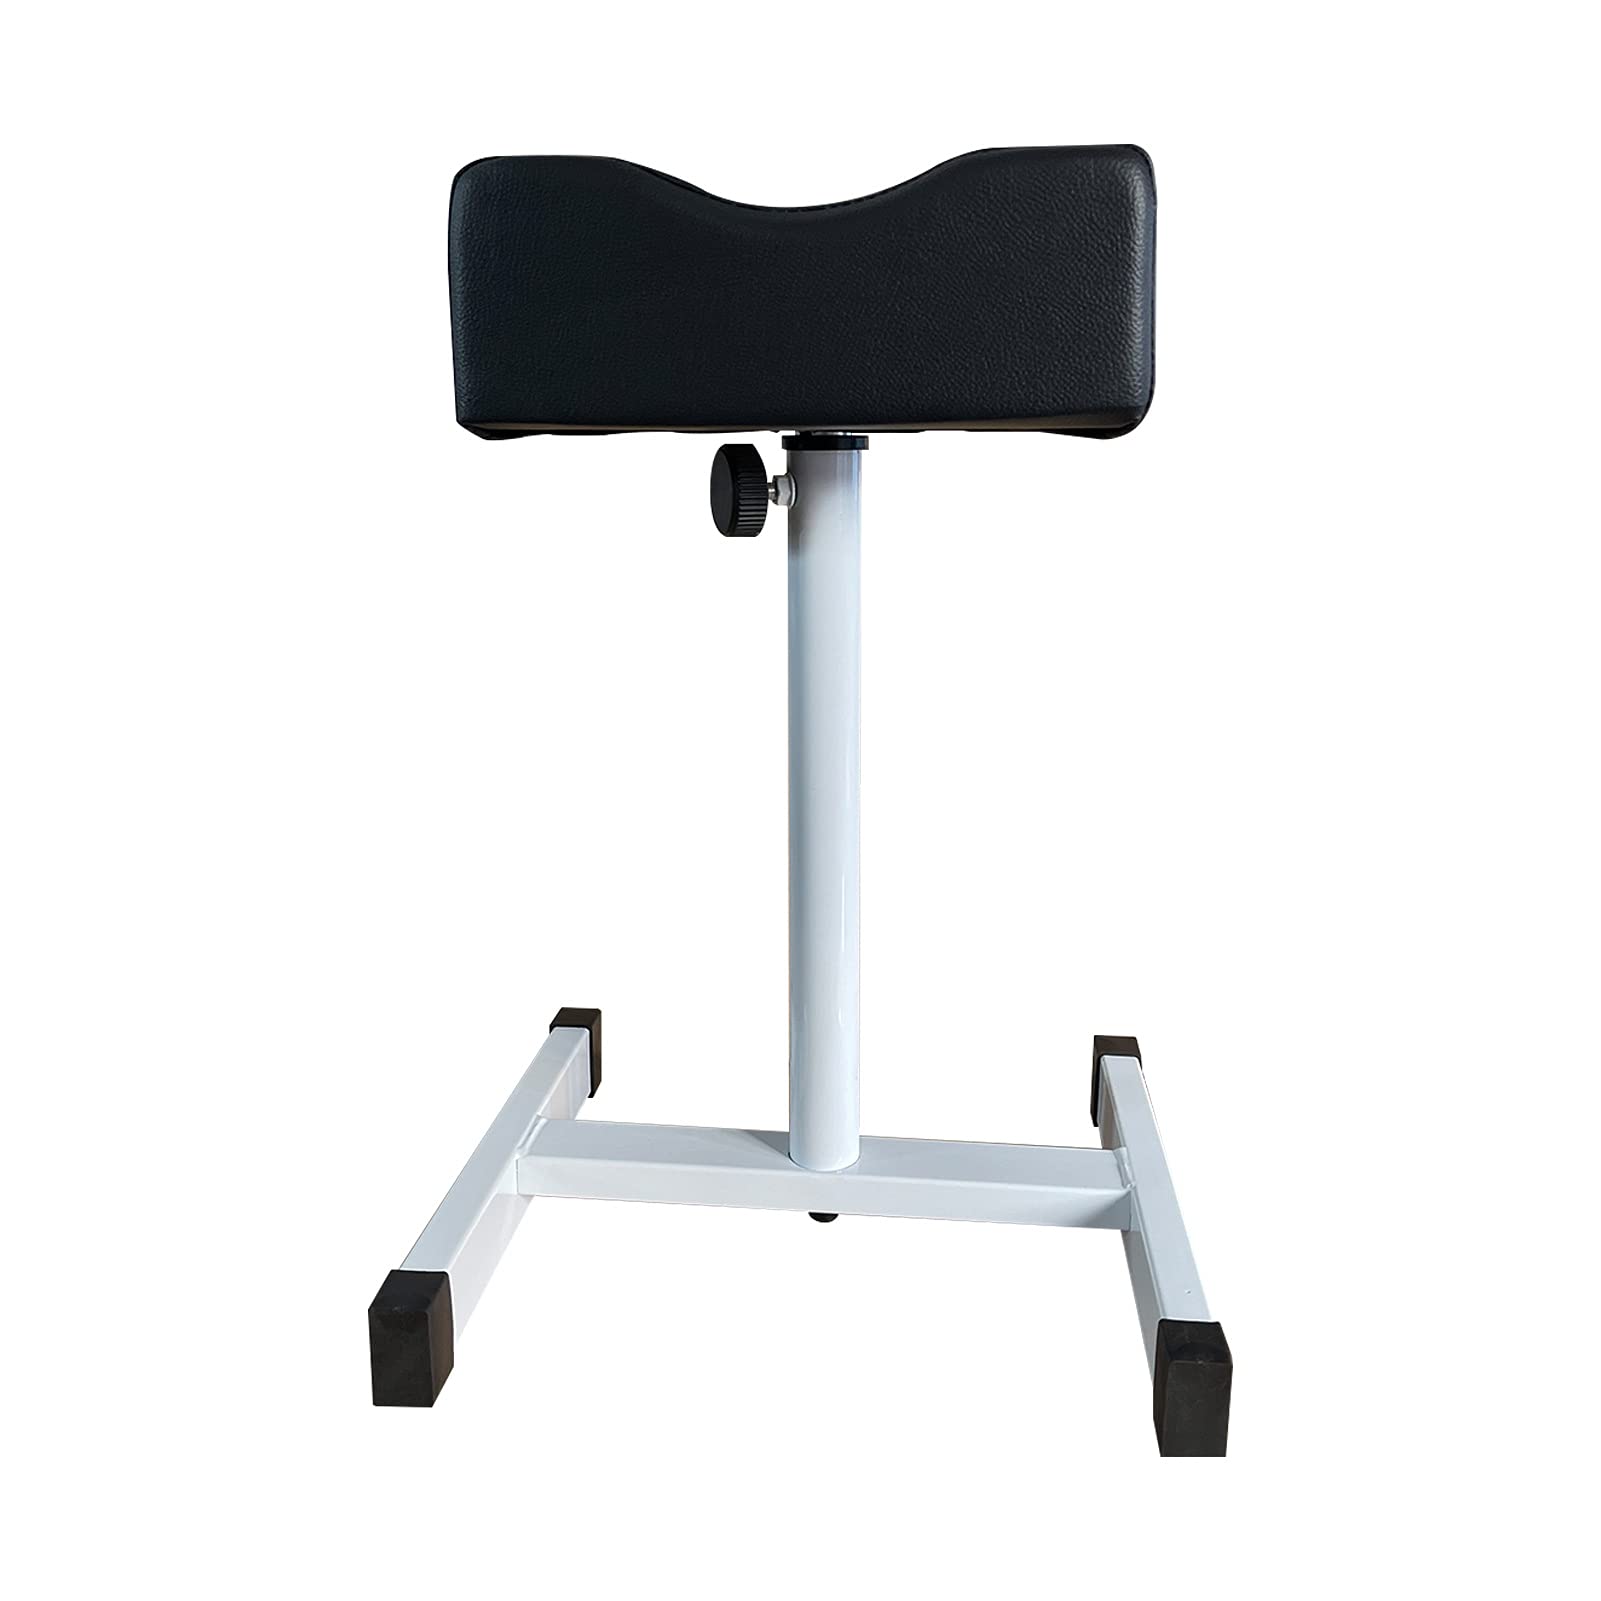 Portable Salon Spa Pedicure Stool Foot Rest Stool Chair Height Length  Adjustable